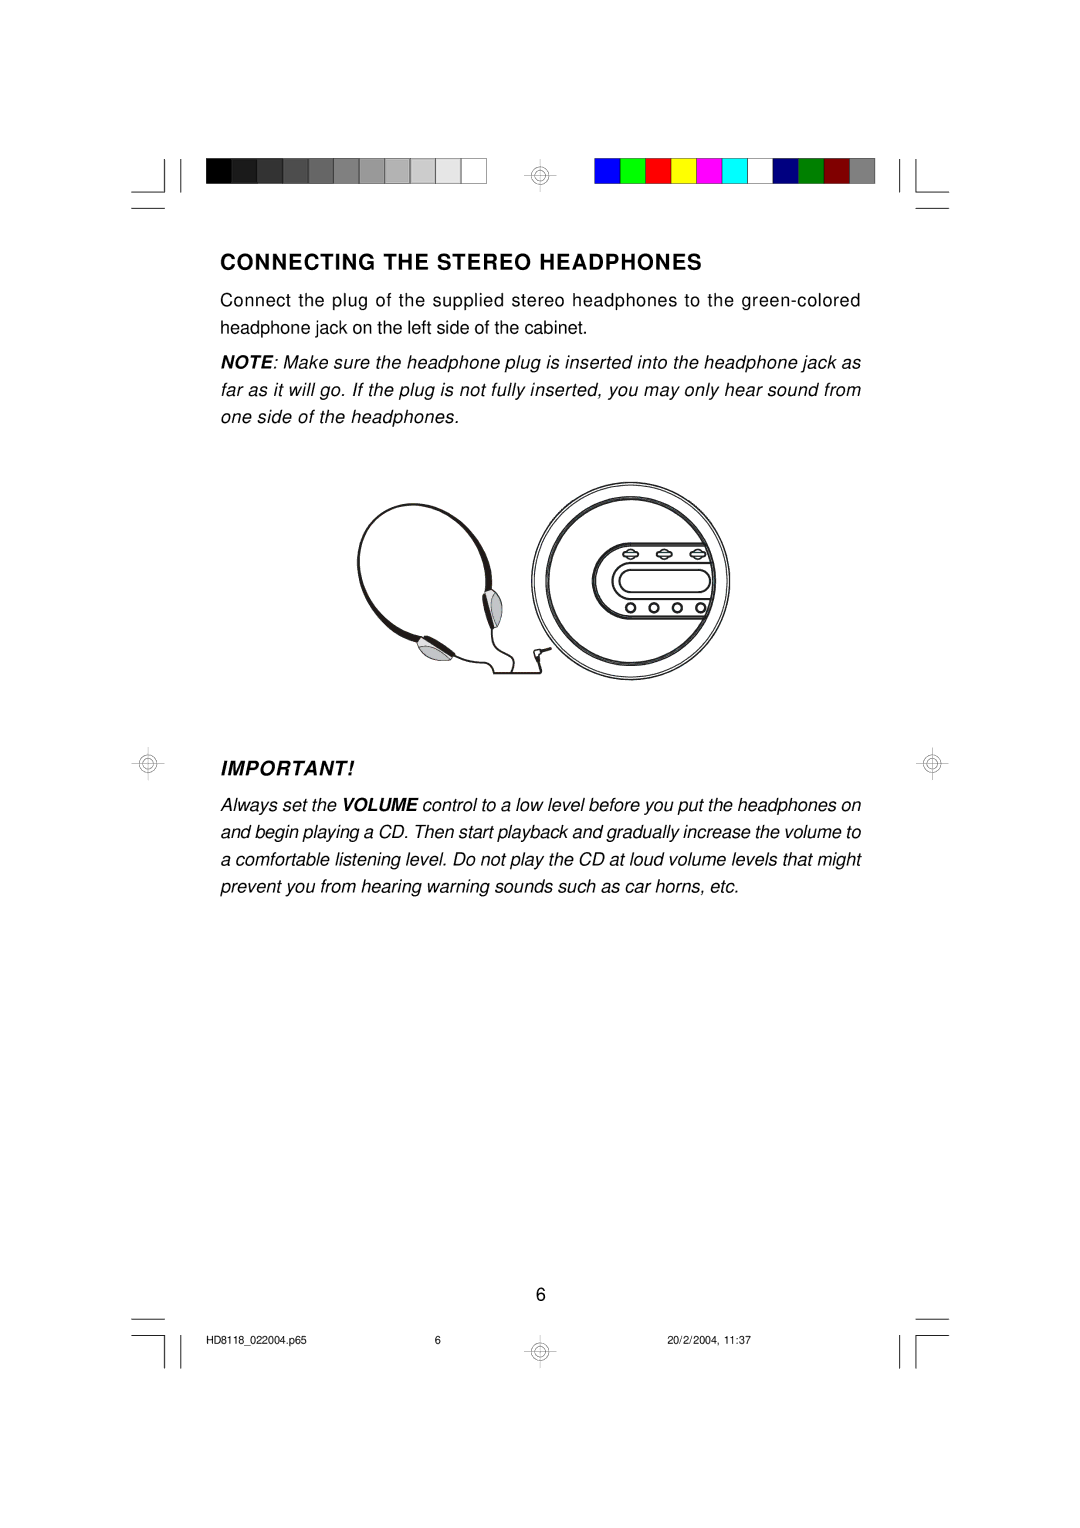 Emerson HD8118 owner manual Connecting the Stereo Headphones 